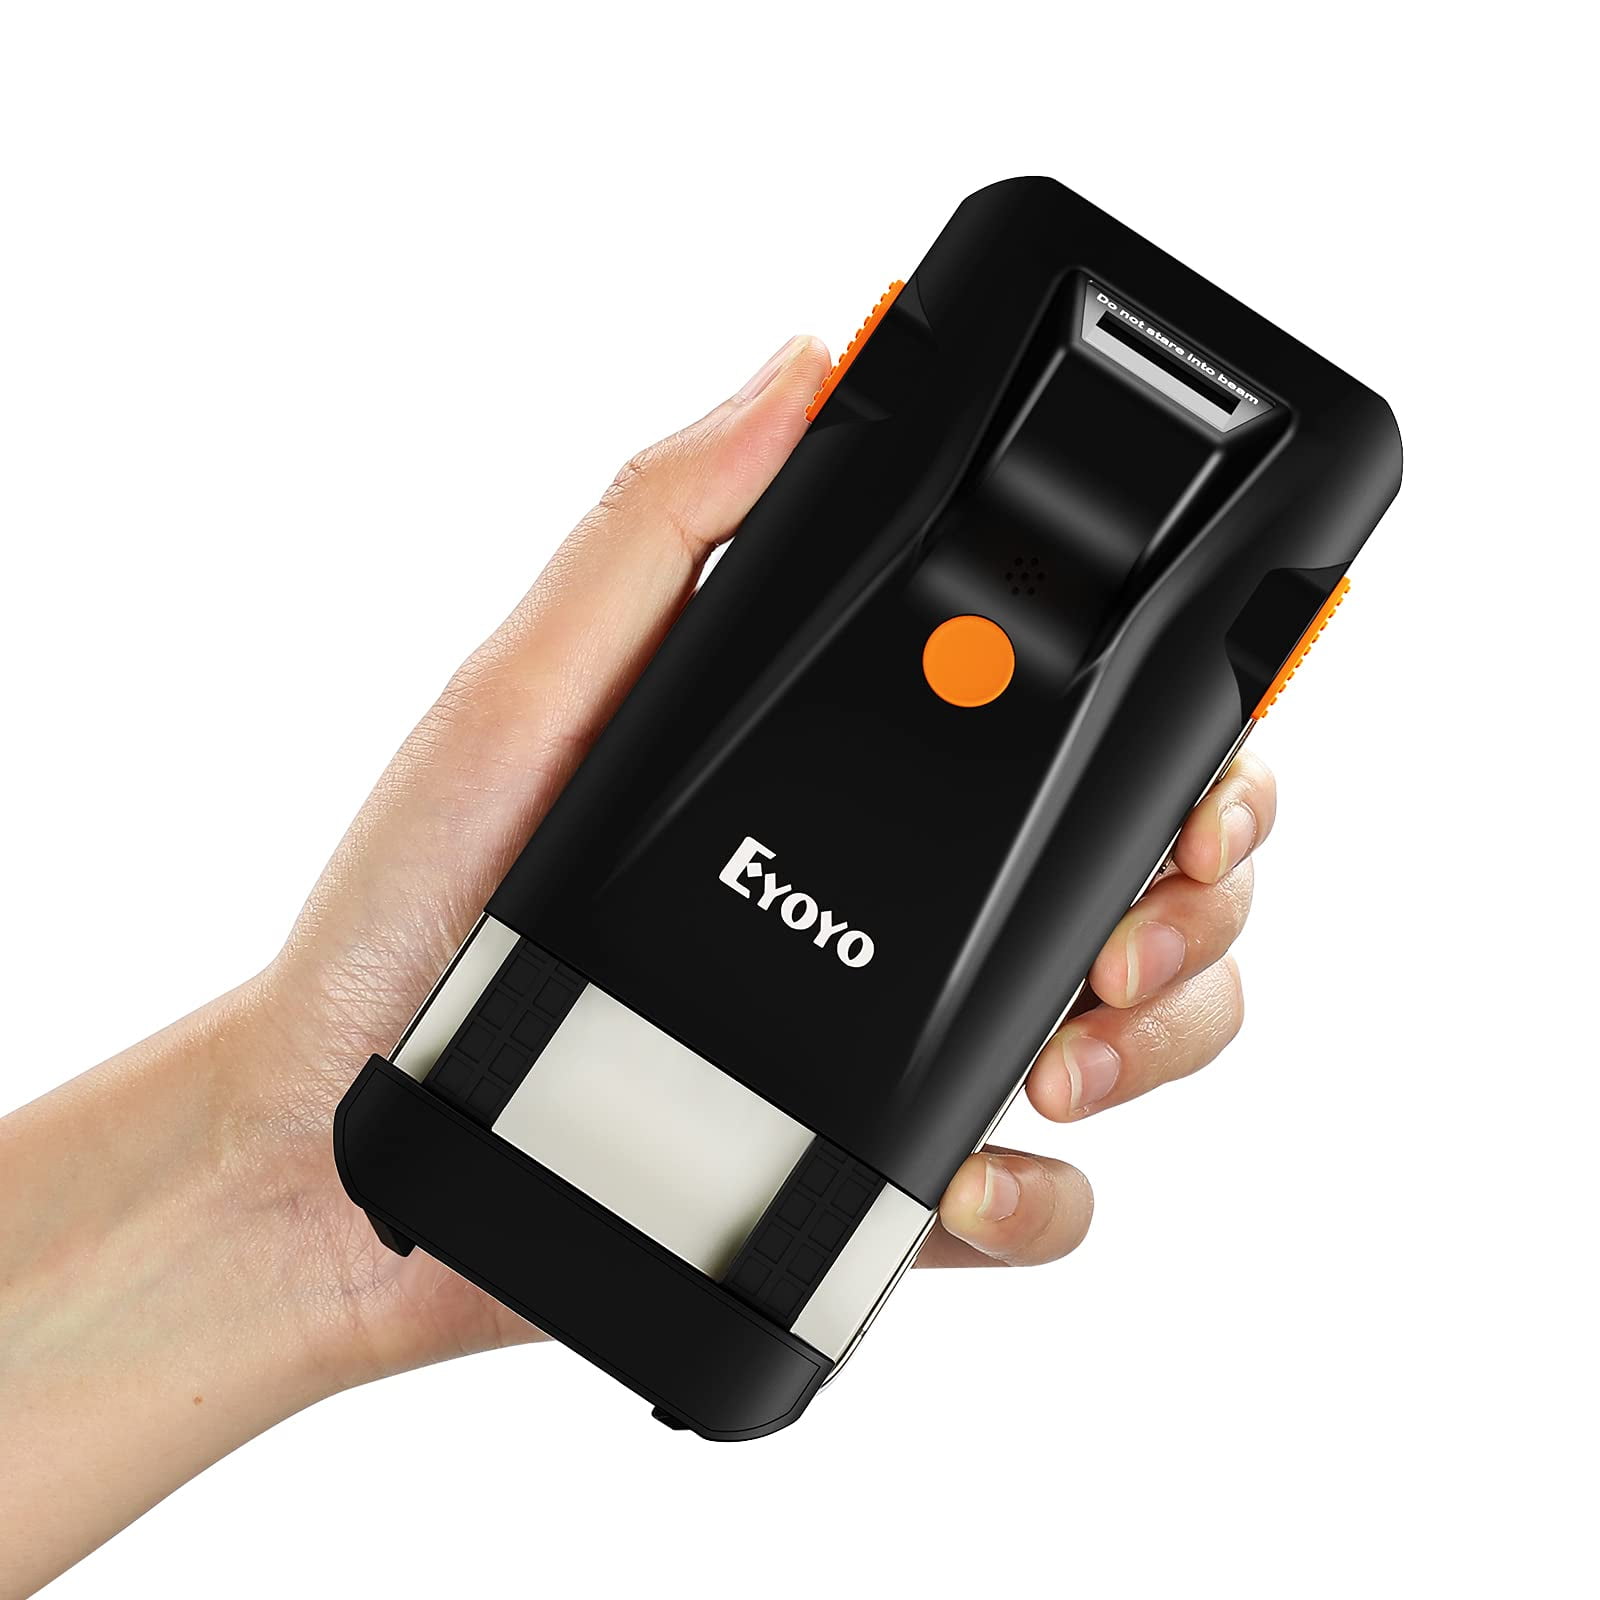 Eyoyo Barcode Scanner, 3-in-1 1D ISBN Scanner for Management Compatible iPhone,Android, iOS -